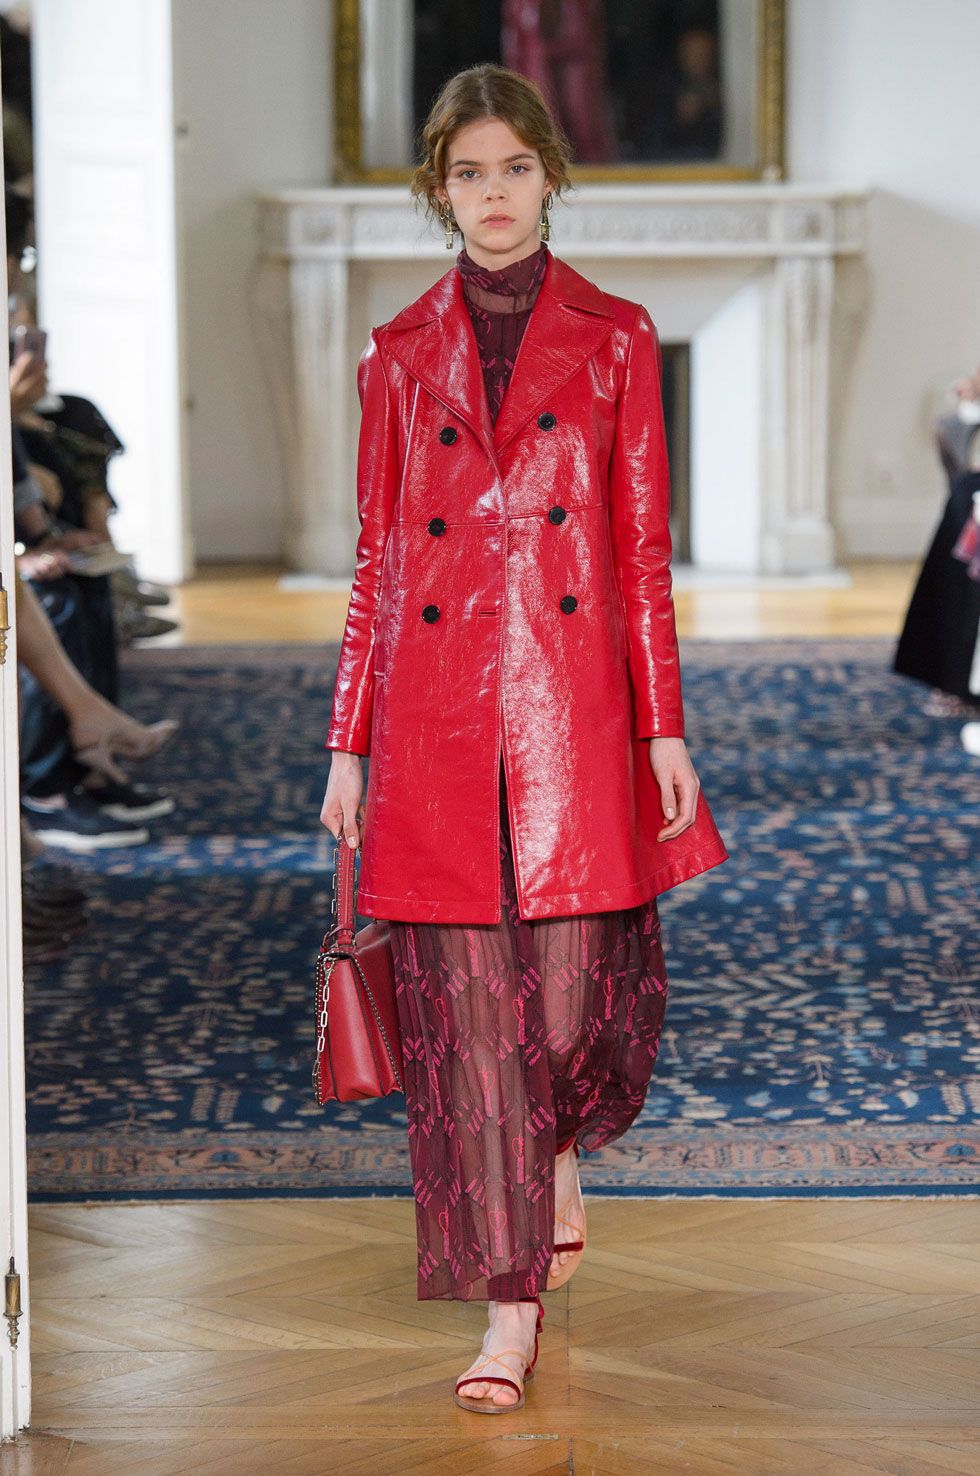 64 Looks From the Valentino Spring 2017 Show - Valentino Runway Show at ...